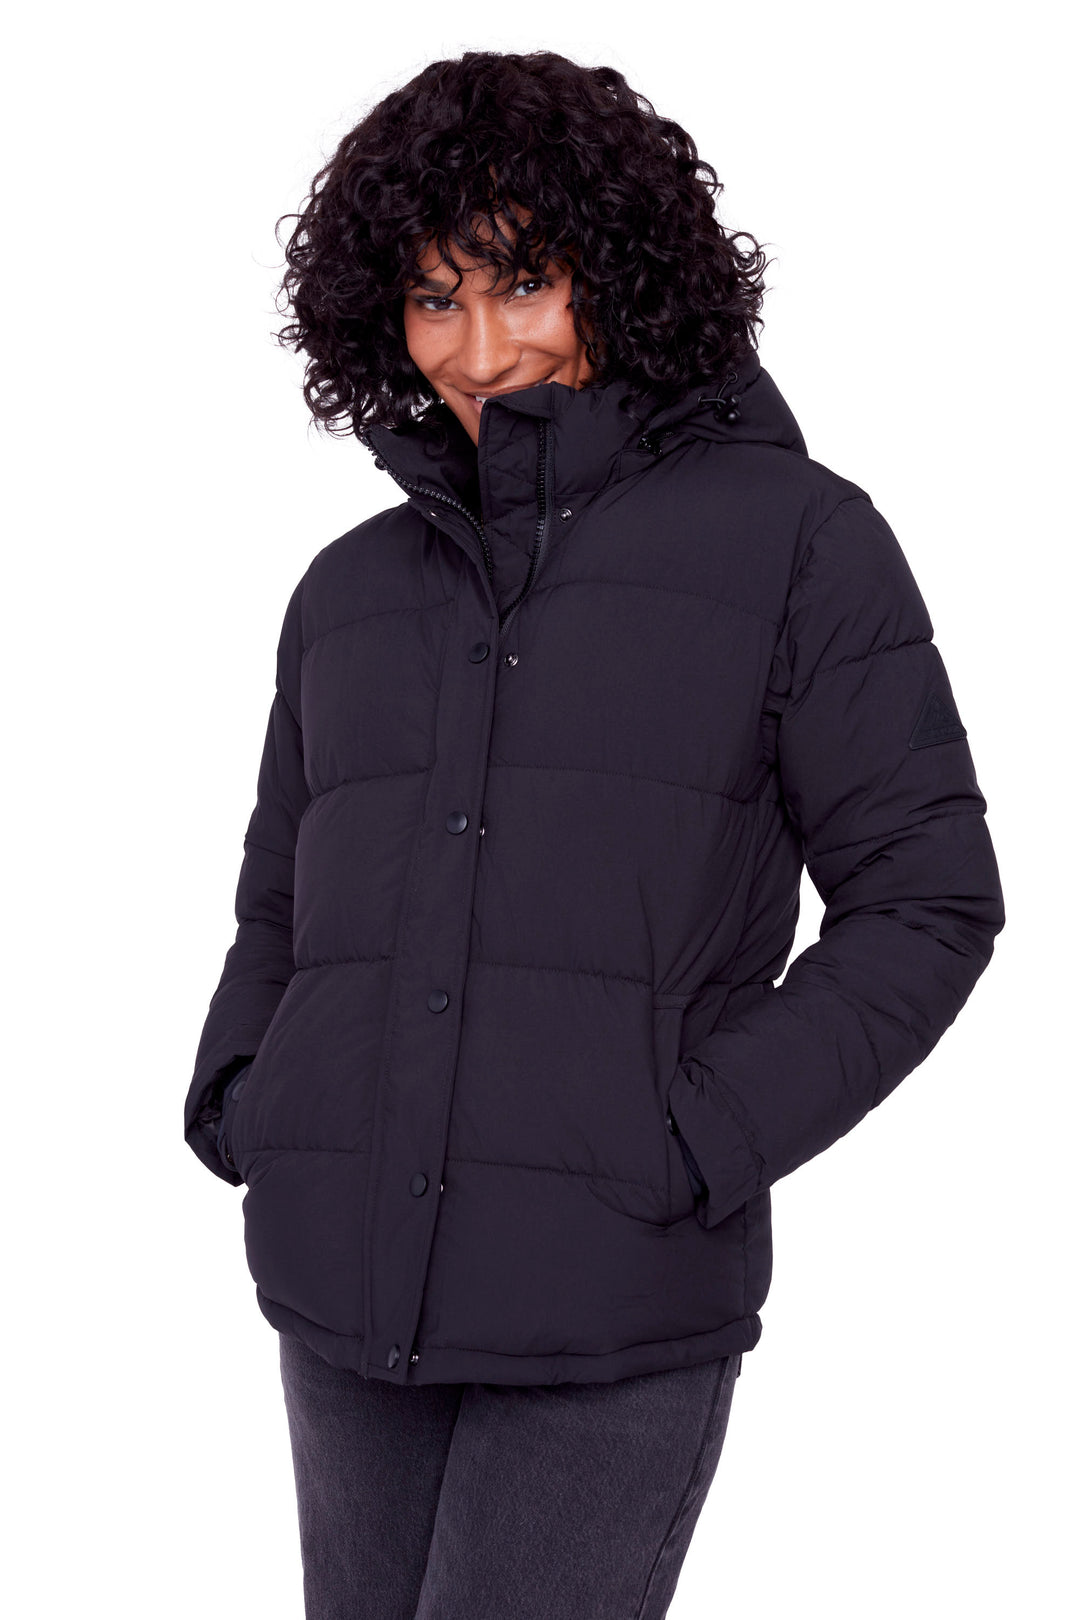 FORILLON | WOMEN'S VEGAN DOWN (RECYCLED) SHORT QUILTED PUFFER JACKET, BLACK